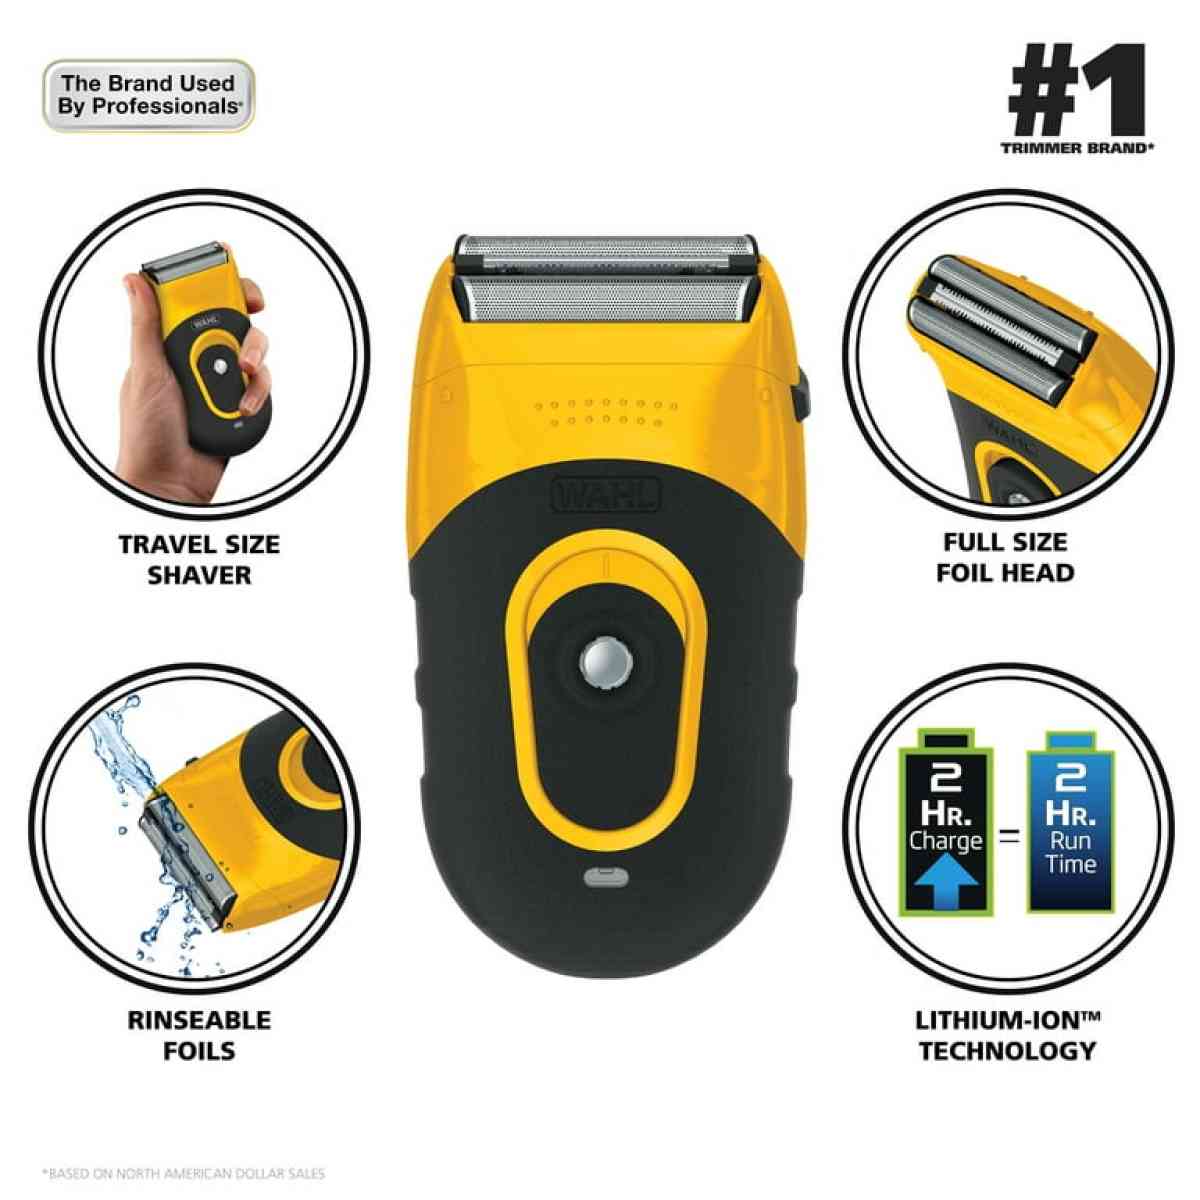 WAHL LIFEPROOF SHAVER LITHIUM ION